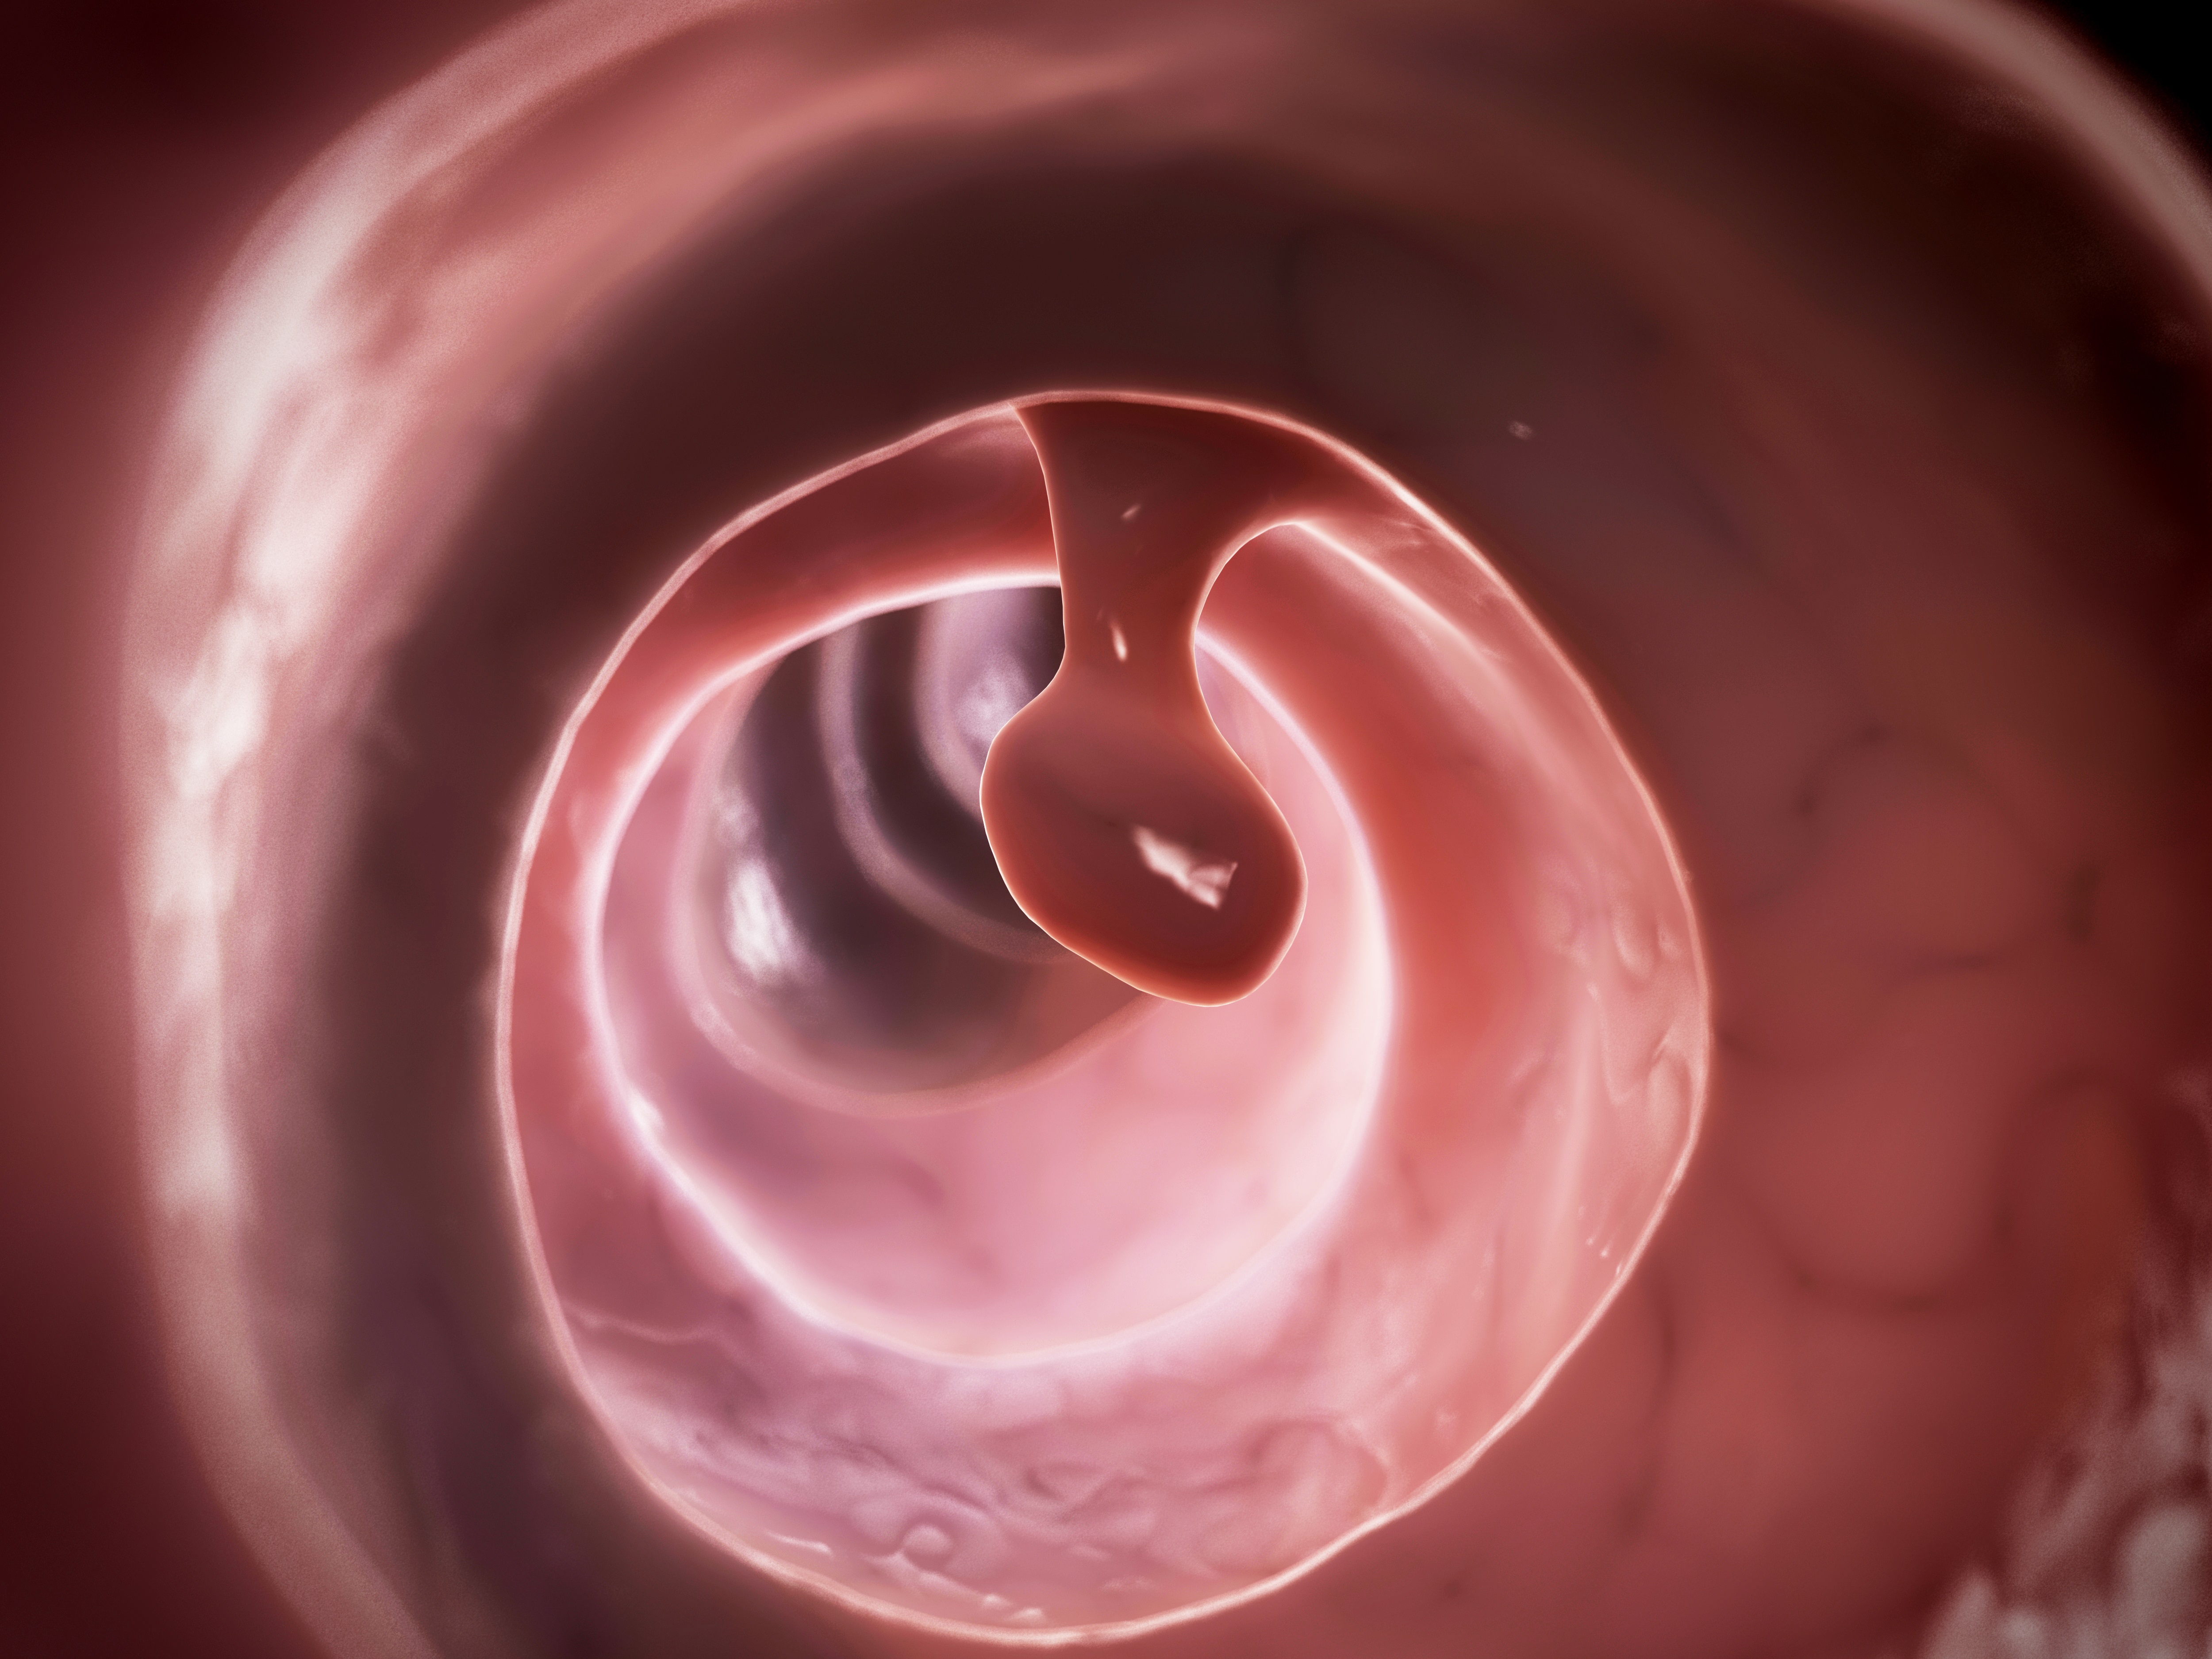 Novel Non-invasive Screening of Colon Cancer Highlighted As Alternative to Colonoscopy for African Americans